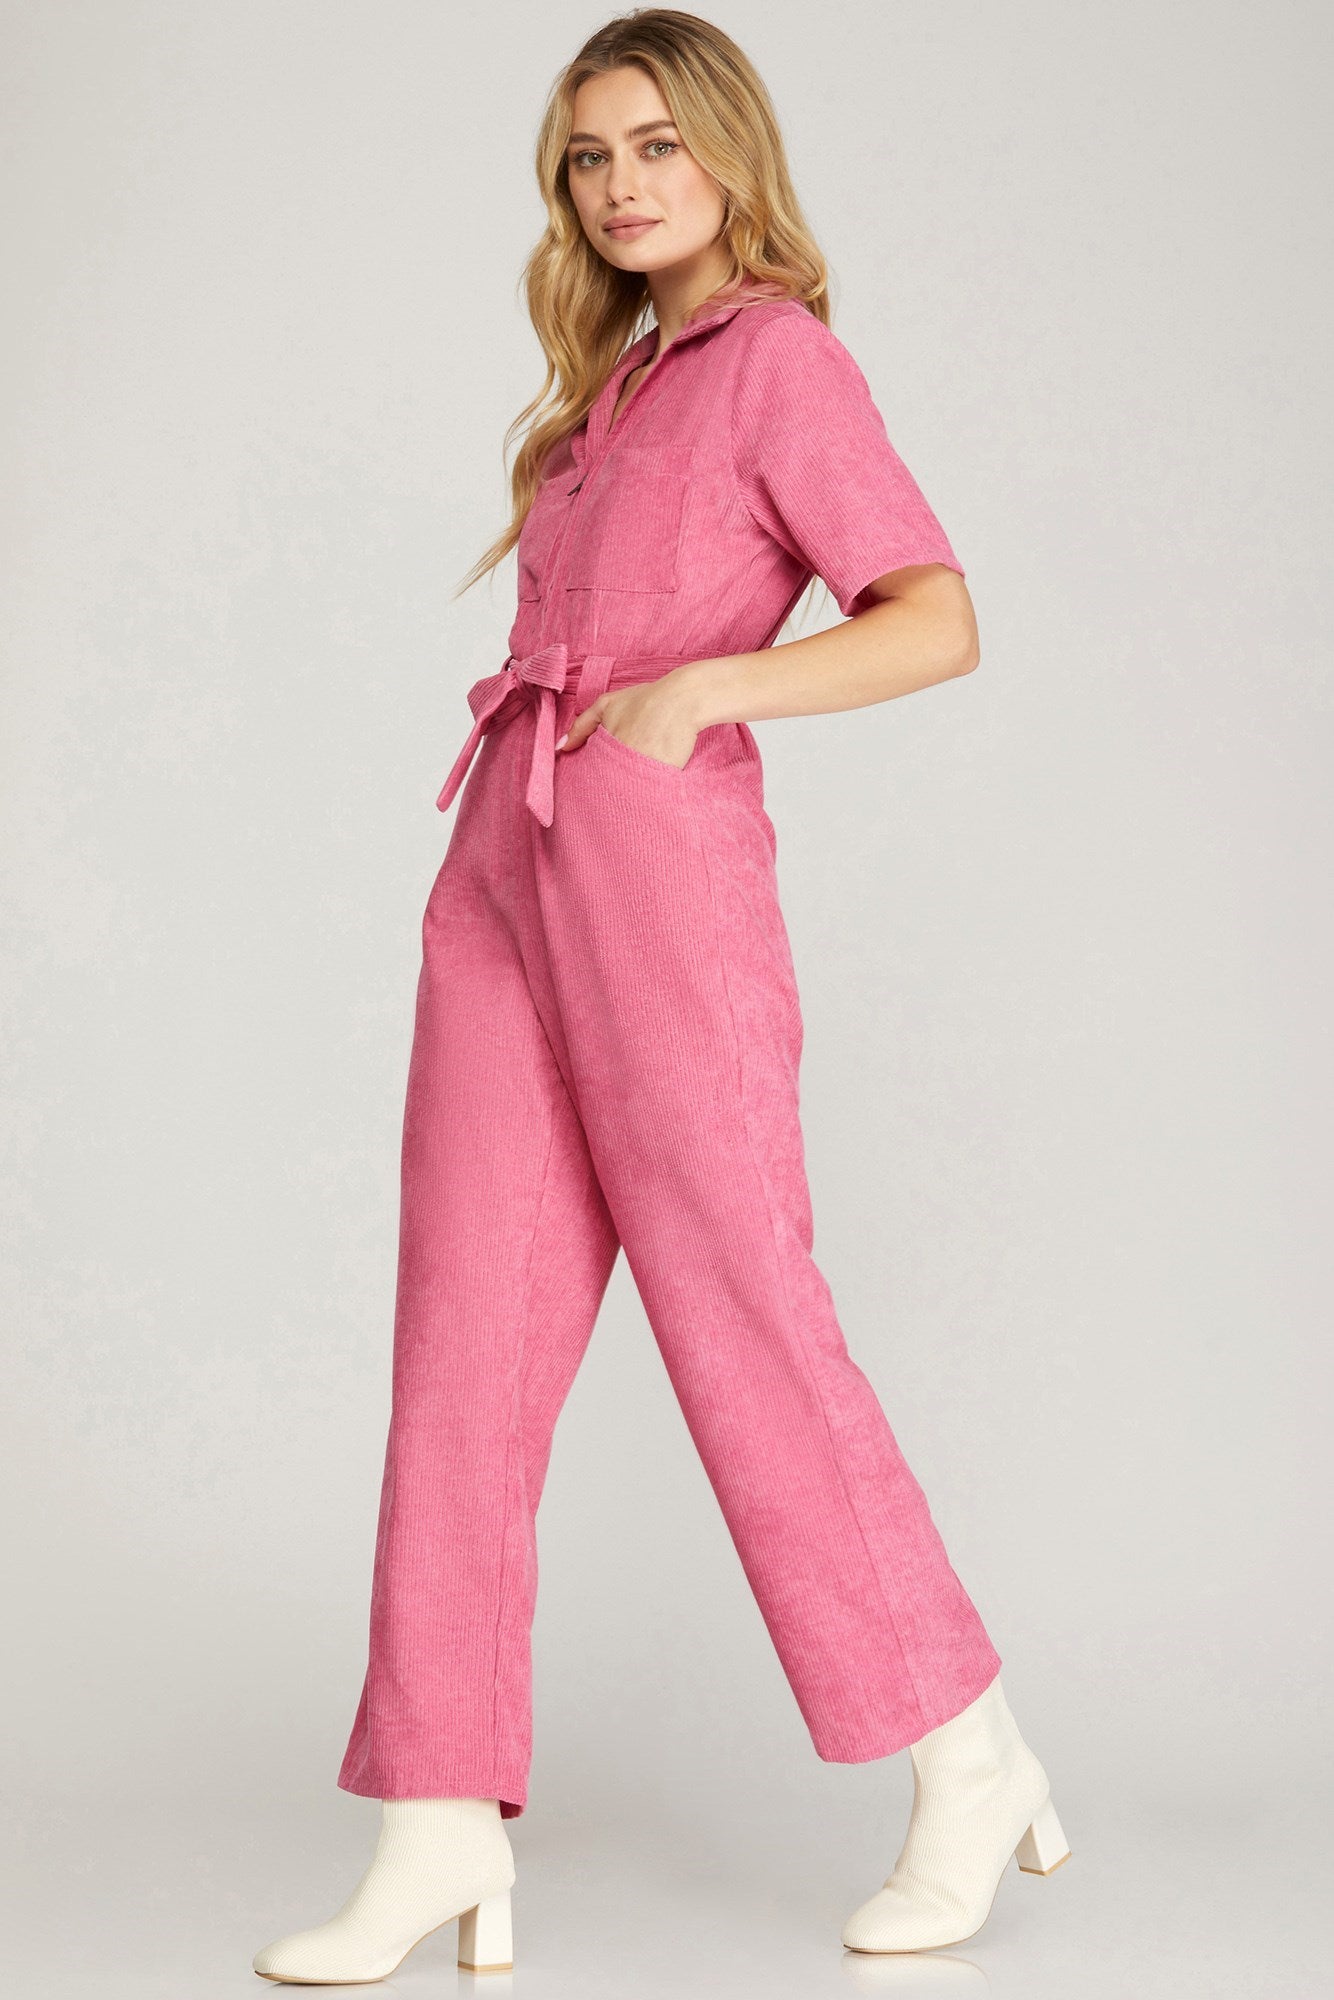 SHE AND SKY Women's Pants Half Sleeve Corduroy Belted Jumpsuit || David's Clothing